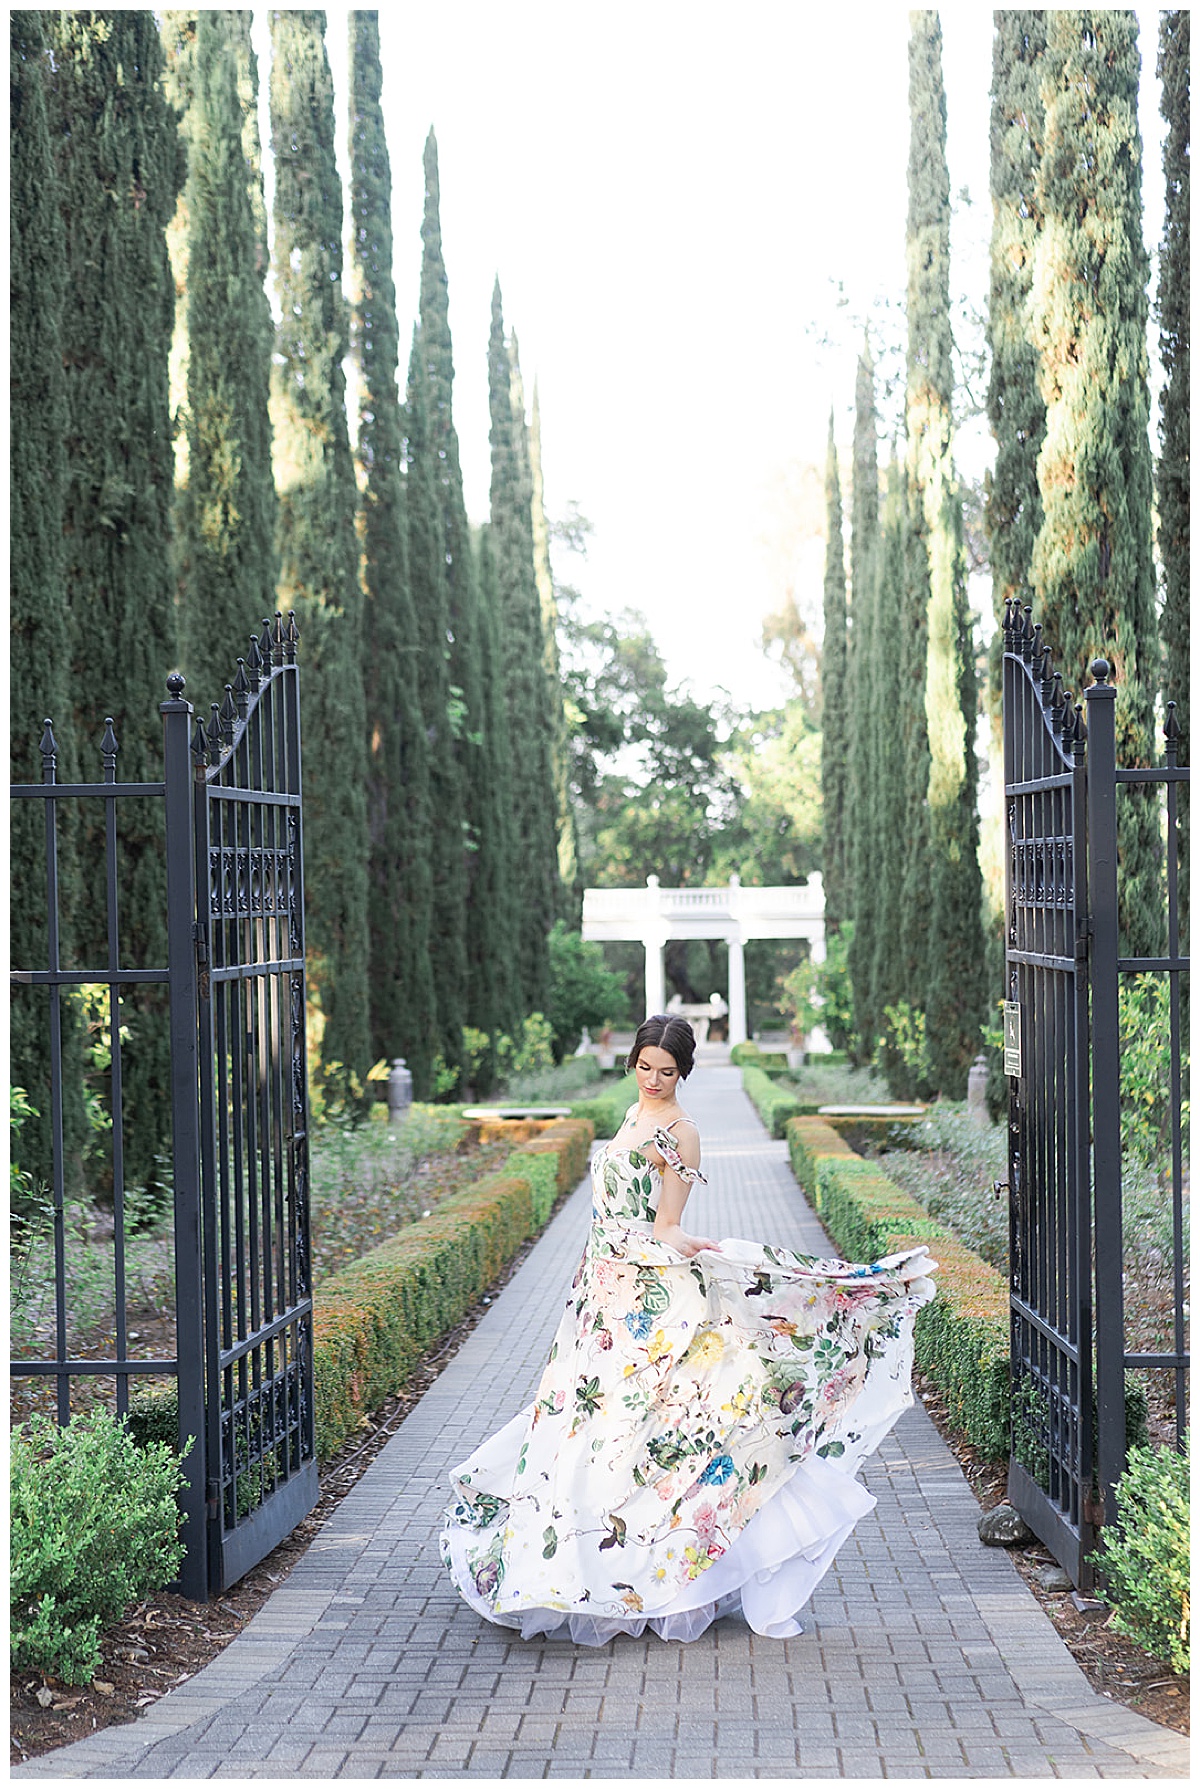 Person dances and twirls dress for Editorial at Villa Montalvo